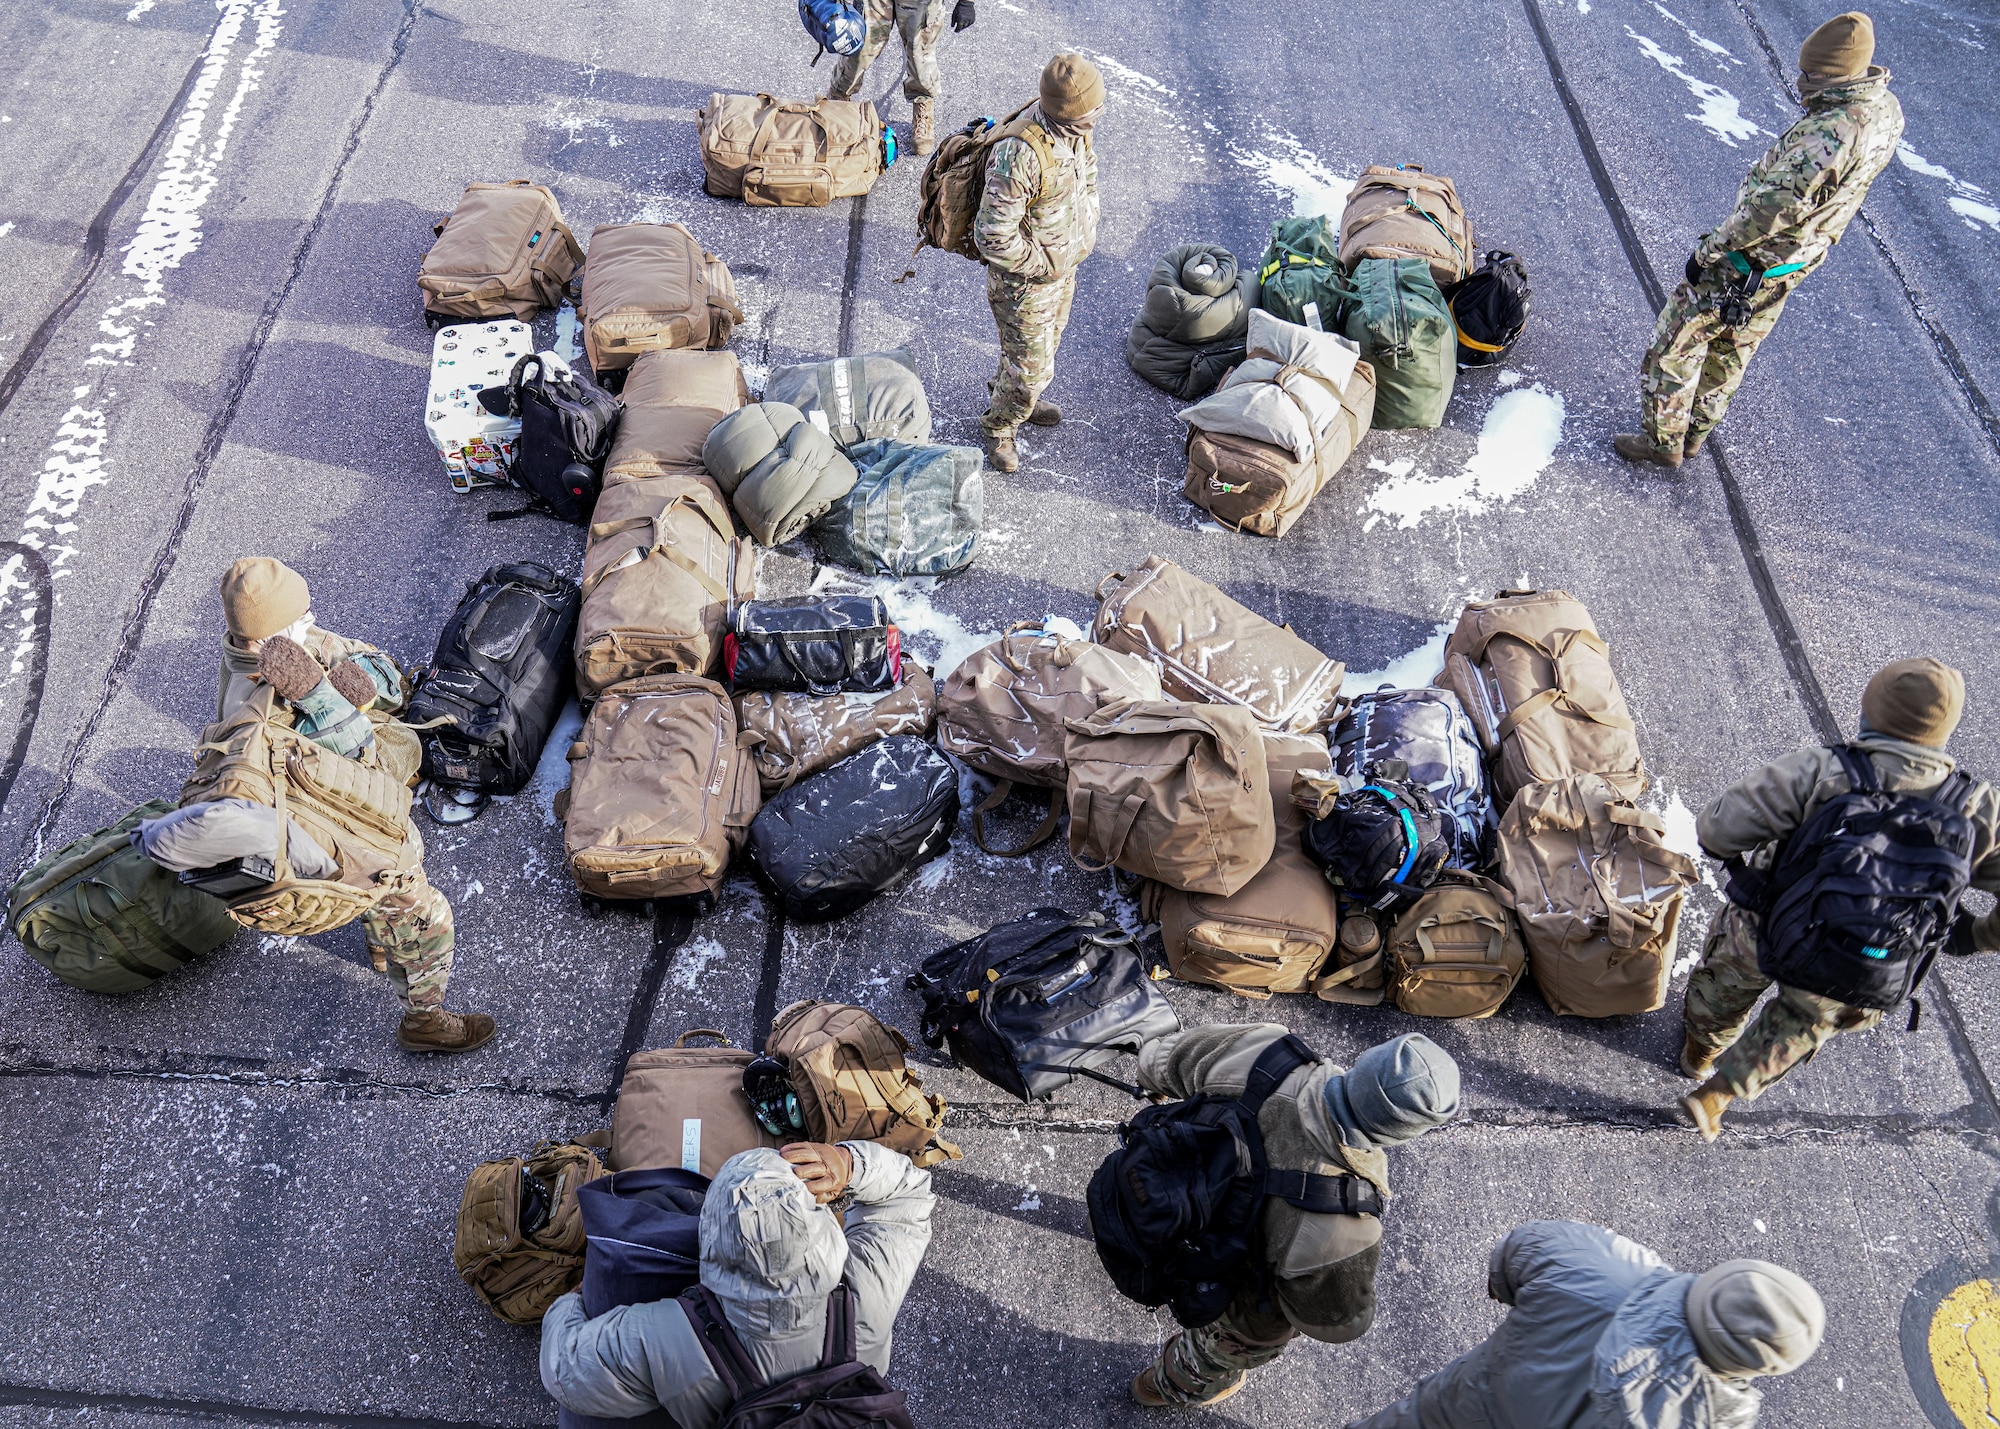 Members assigned to the 6th Air Refueling Wing unload cargo from a KC-135 Stratotanker aircraft during North American Aerospace Defense Command's (NORAD) Operation Noble Defender (OND), March 15, 2022.